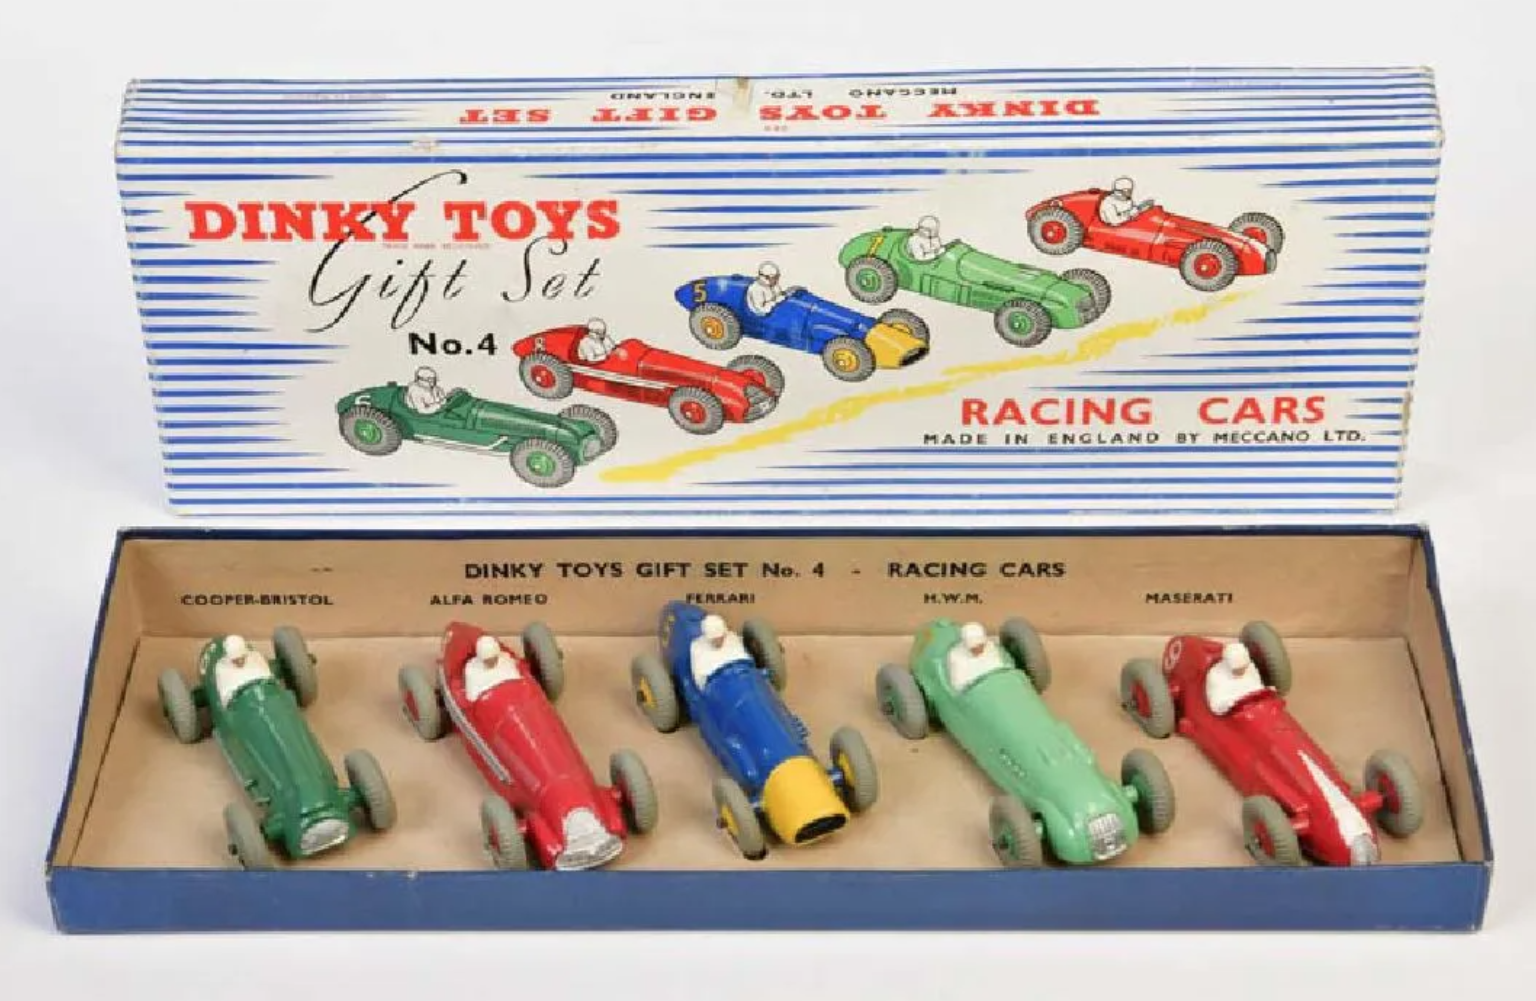 A Dinky Toys gift set of No 4 racing cars sold for $1,298 plus the buyer’s premium in March 2018. Image courtesy of Antico Mondo Auktionen and LiveAuctioneers.